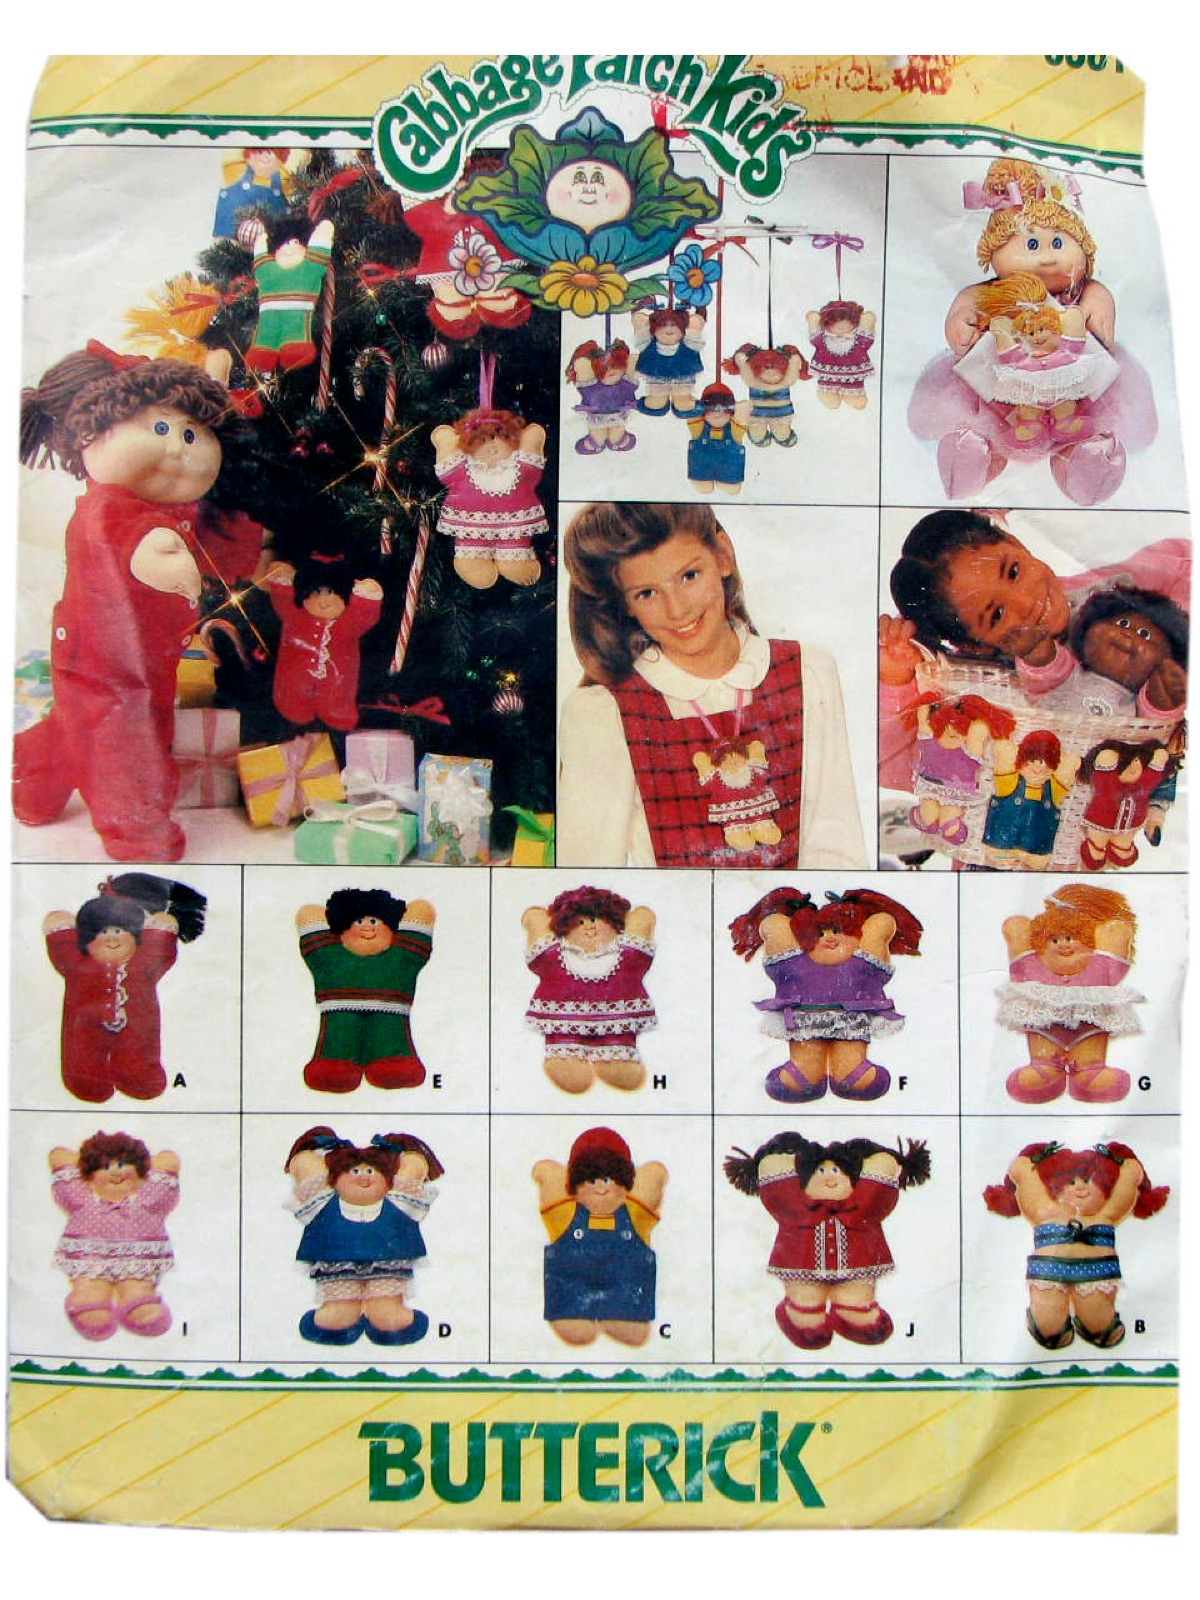 cabbage patch kids - Naa Ich Clano $13 Se Butterick